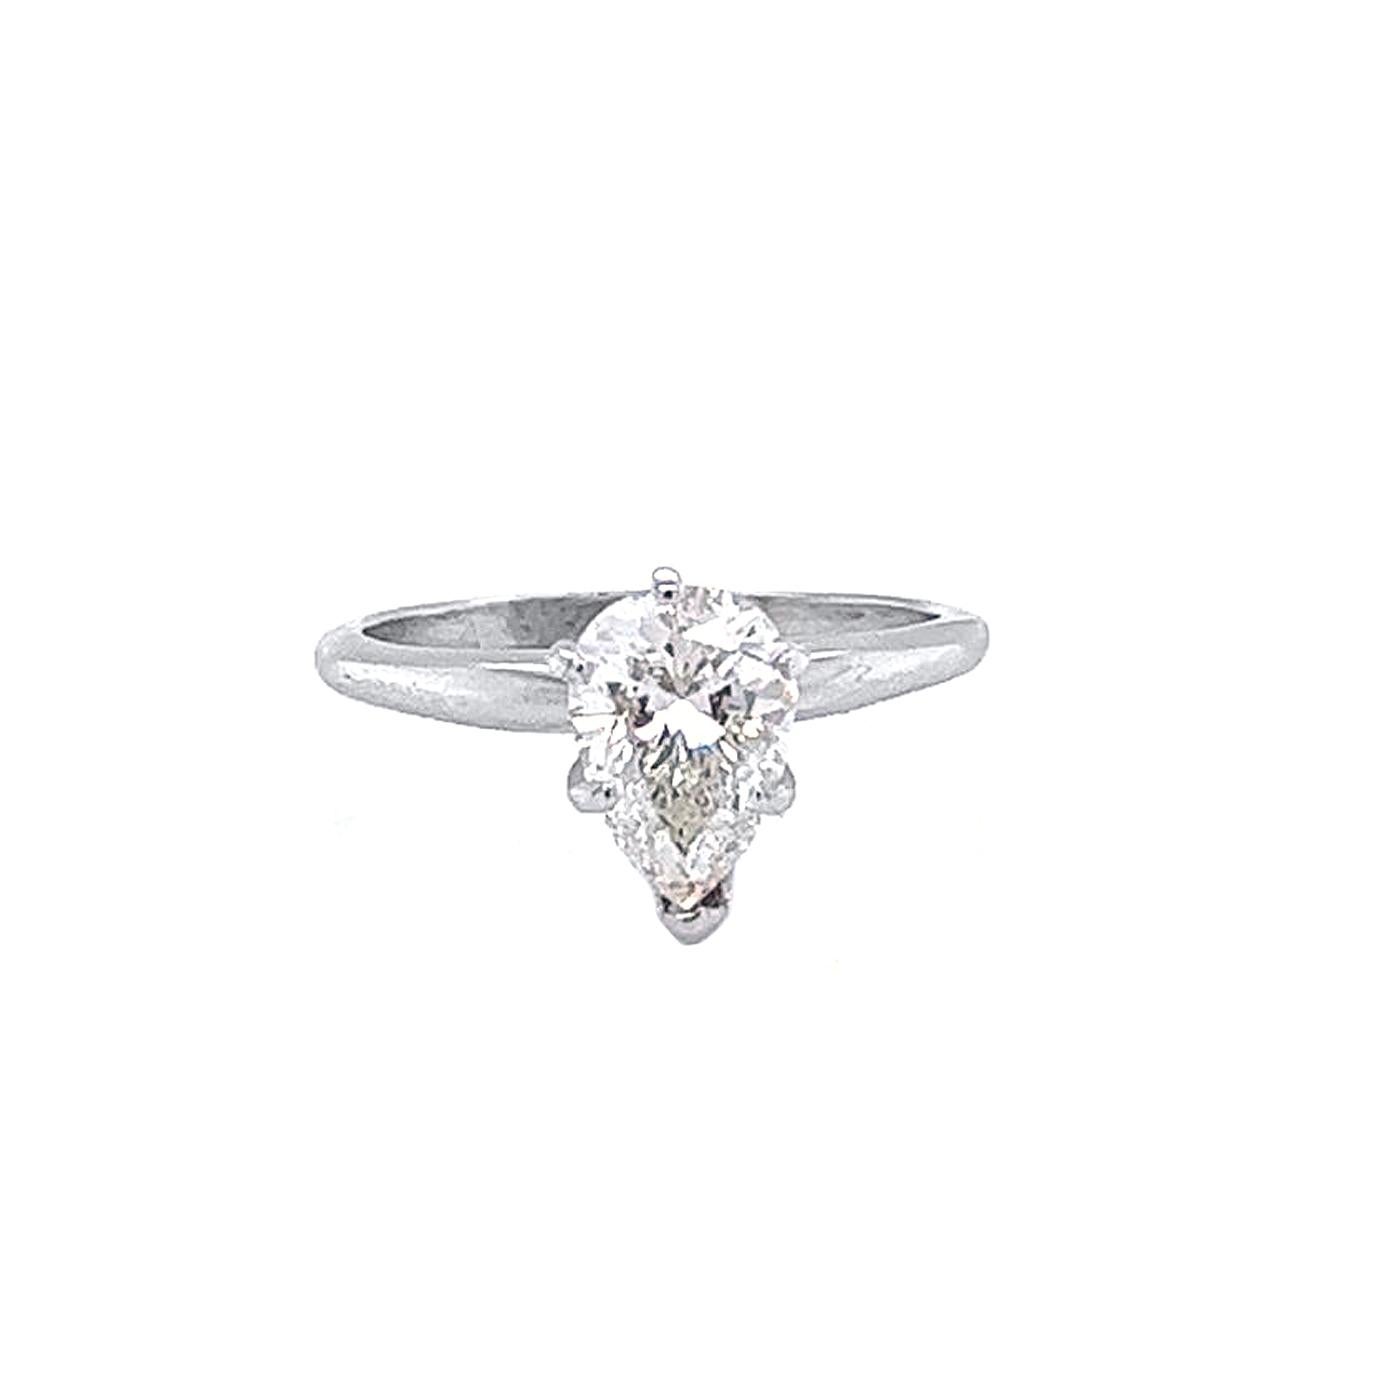 This Magnificent 1.92 ct Pear Shape H/Si1 Diamond Ring is the ideal spot to start if you want to make the best decision. The magnificent Pear Shape setting holds the diamond's bright shine, which has a sparkling appearance. Maximum shine for a woman